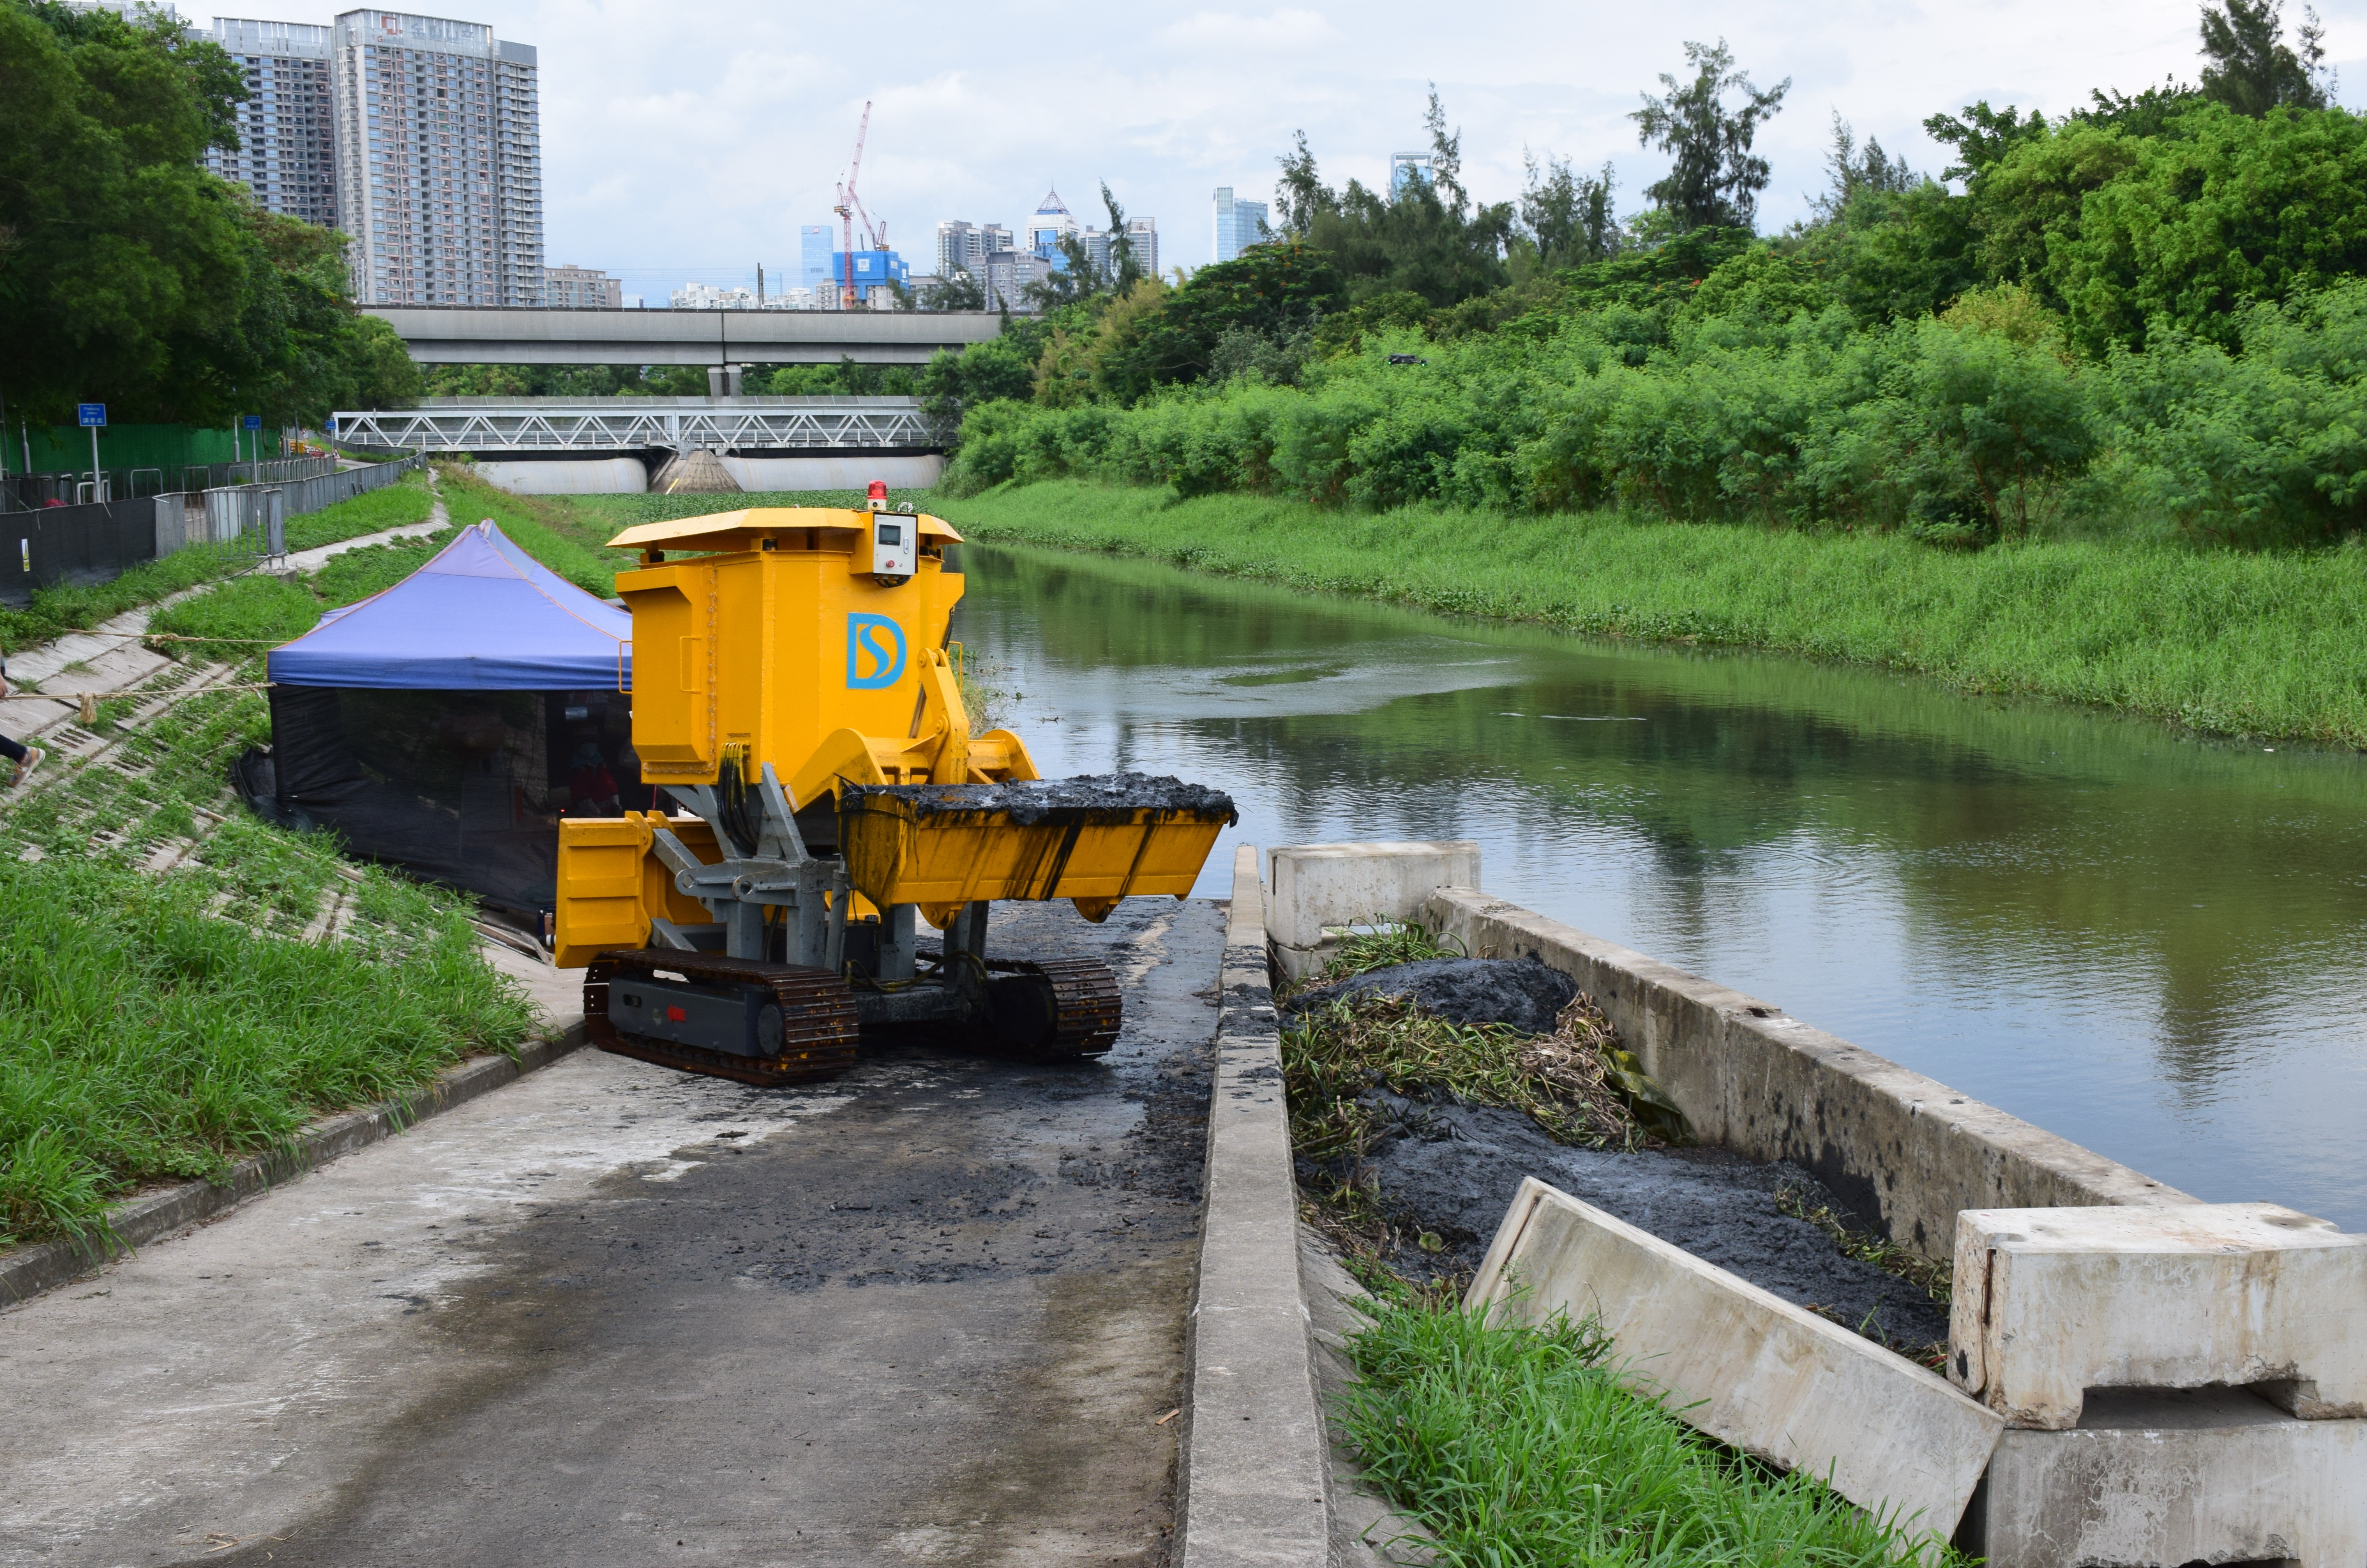 River Ranger - Wireless Battery-powered Remote-controlled Desilting Robot for River Channels